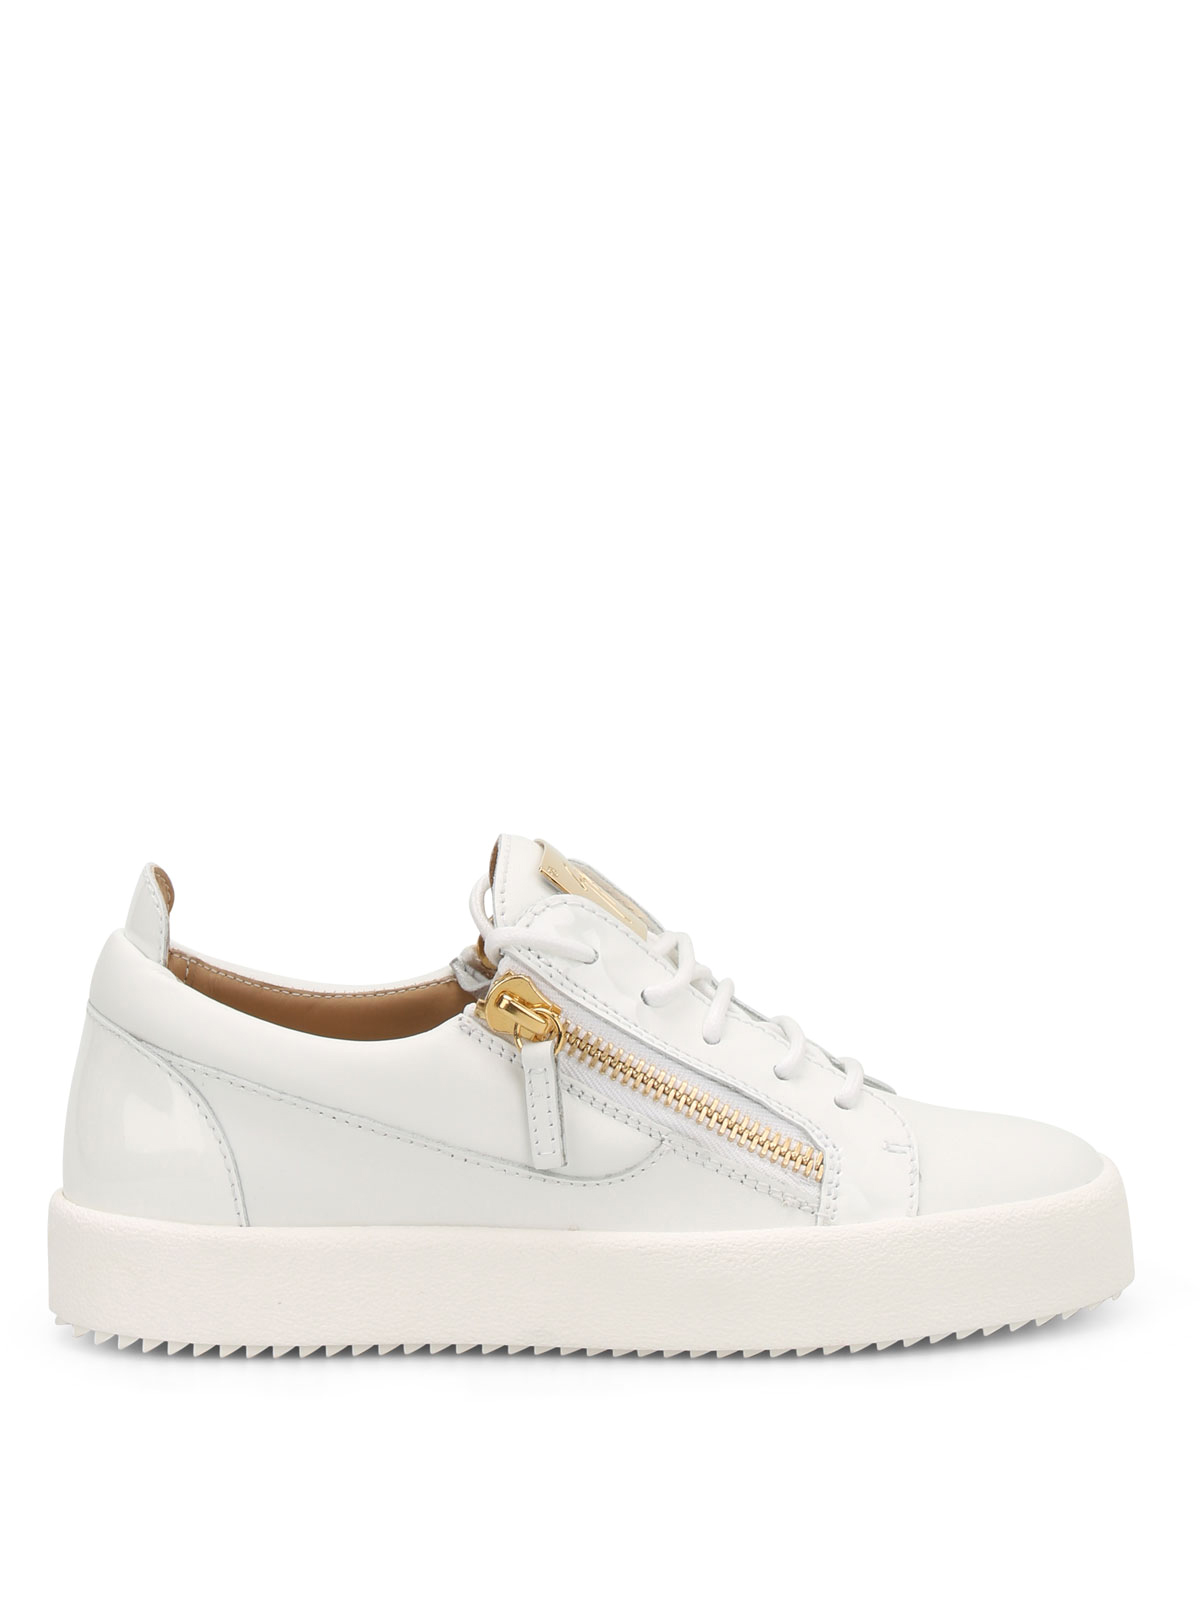 Trainers Giuseppe Zanotti - May London leather low top sneakers 